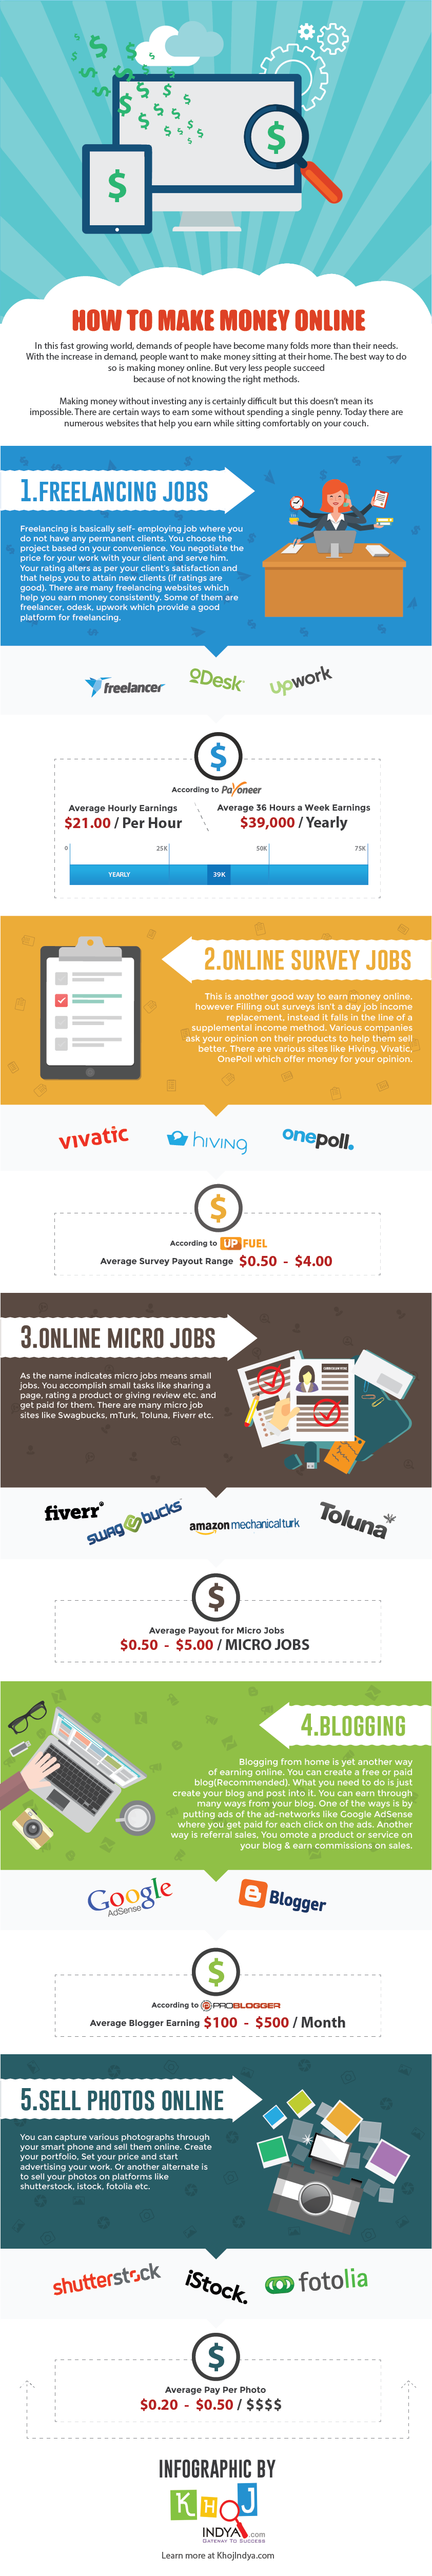 How To Make Money Online #infographic